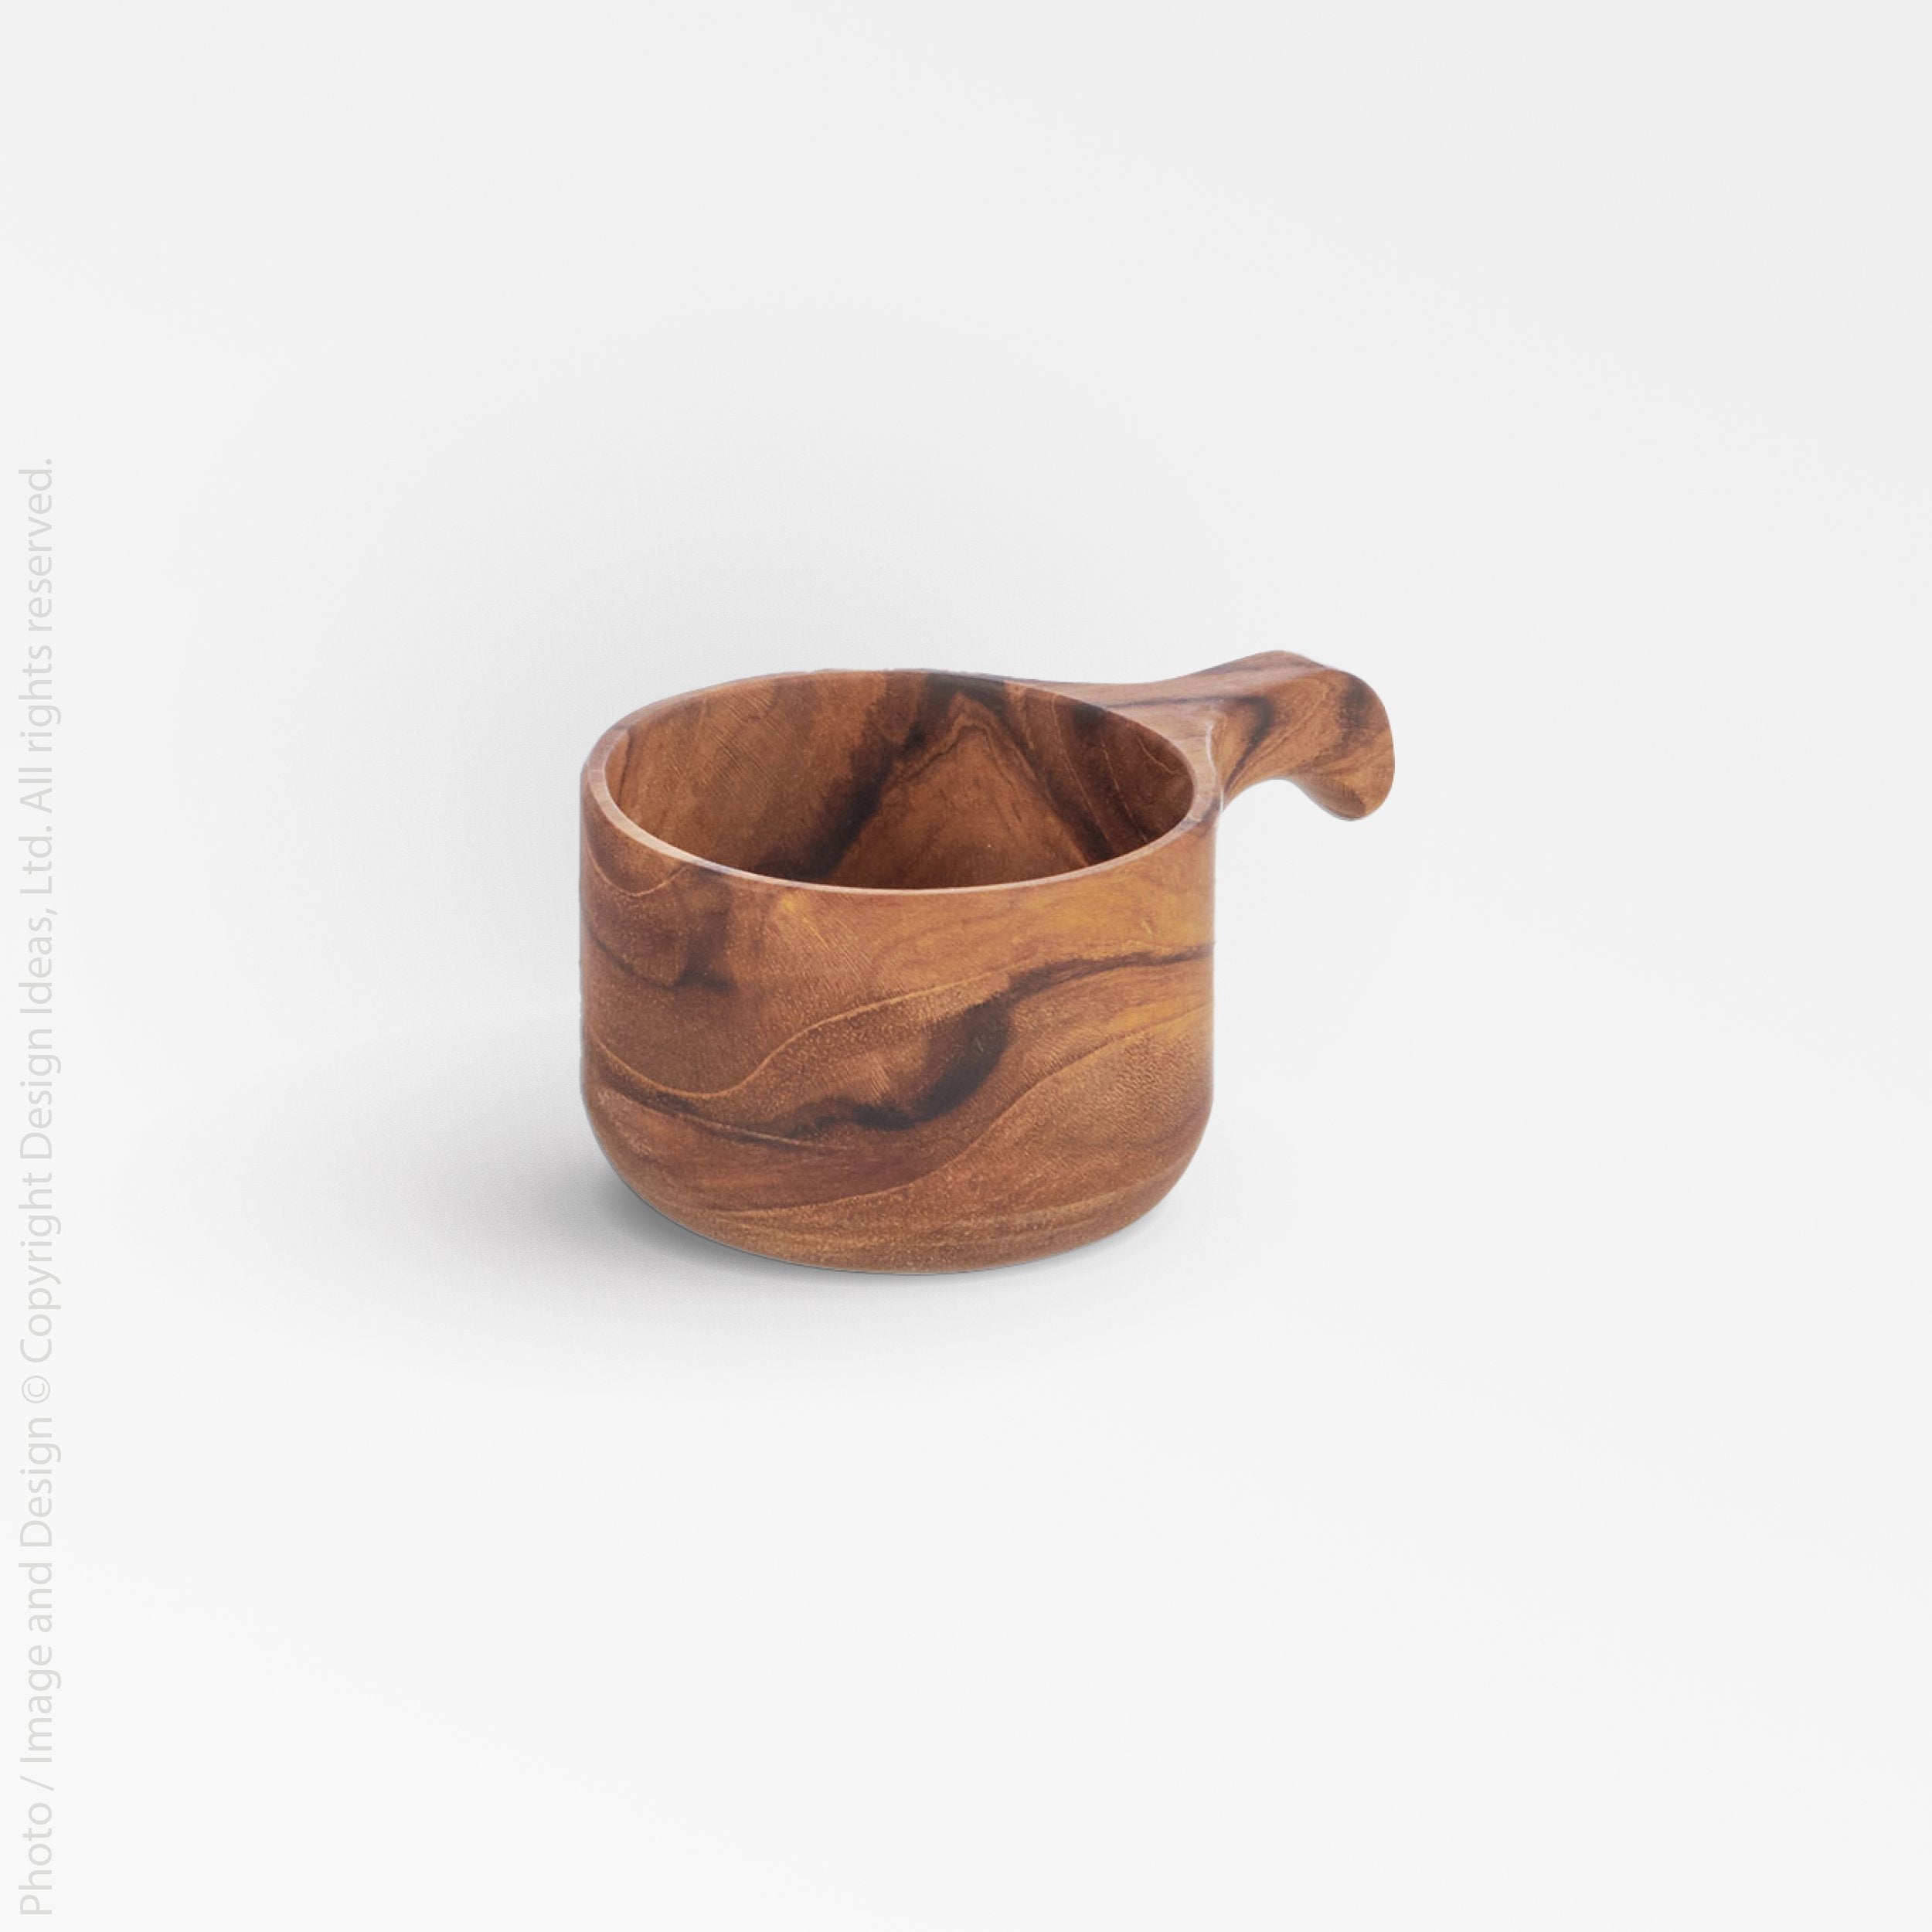 Chiku Teak Cup - Natural Color | Image 1 | From the Chiku Collection | Skillfully made with natural teak for long lasting use | This cup is sustainably sourced | Available in natural color | texxture home